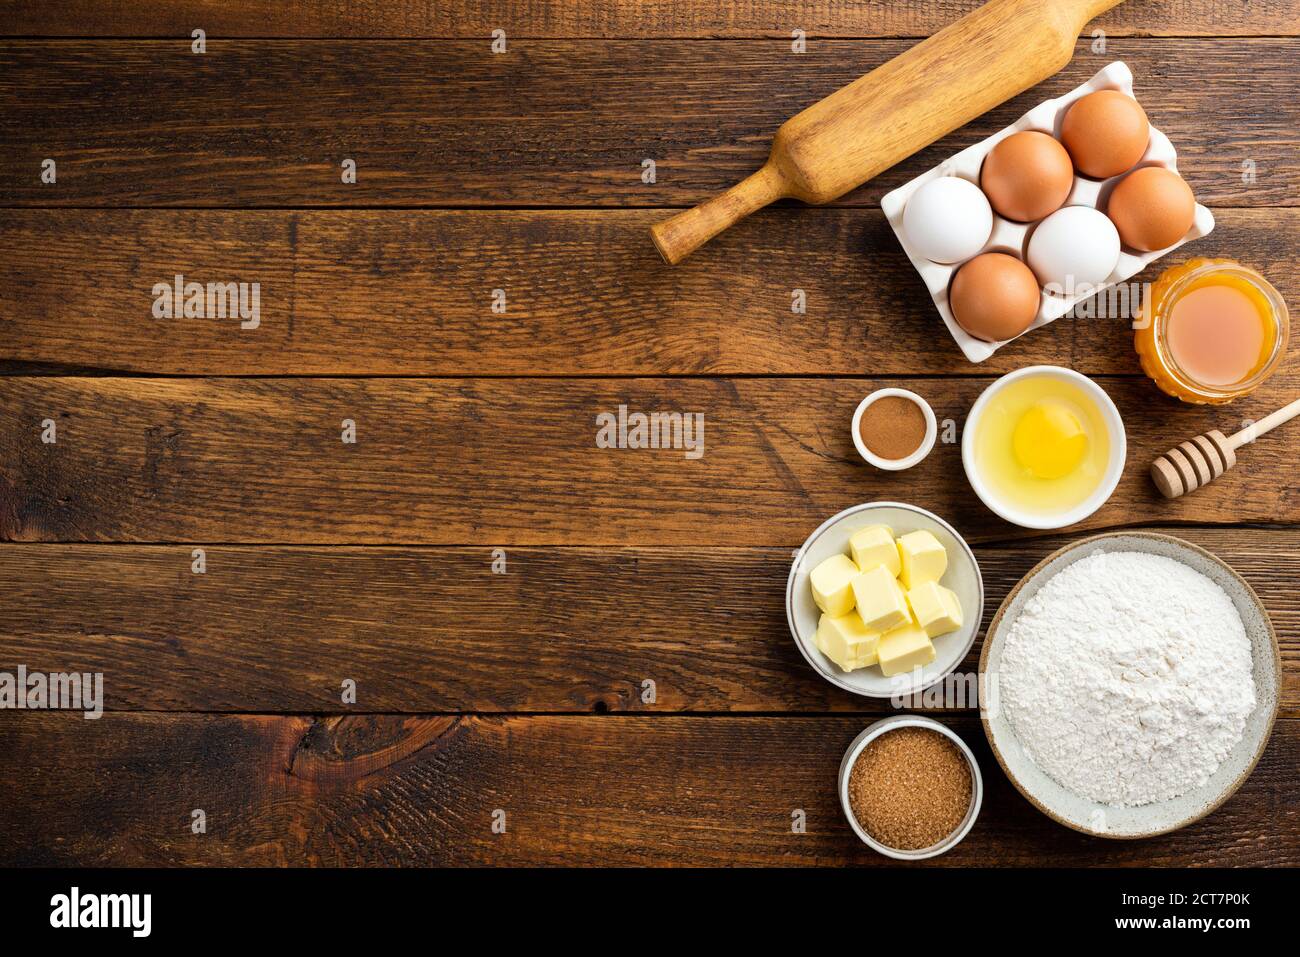 Cooking baking ingredients on a wooden table background. Flour eggs butter sugar and other pastry ingredients on wood. Top view copy space Stock Photo